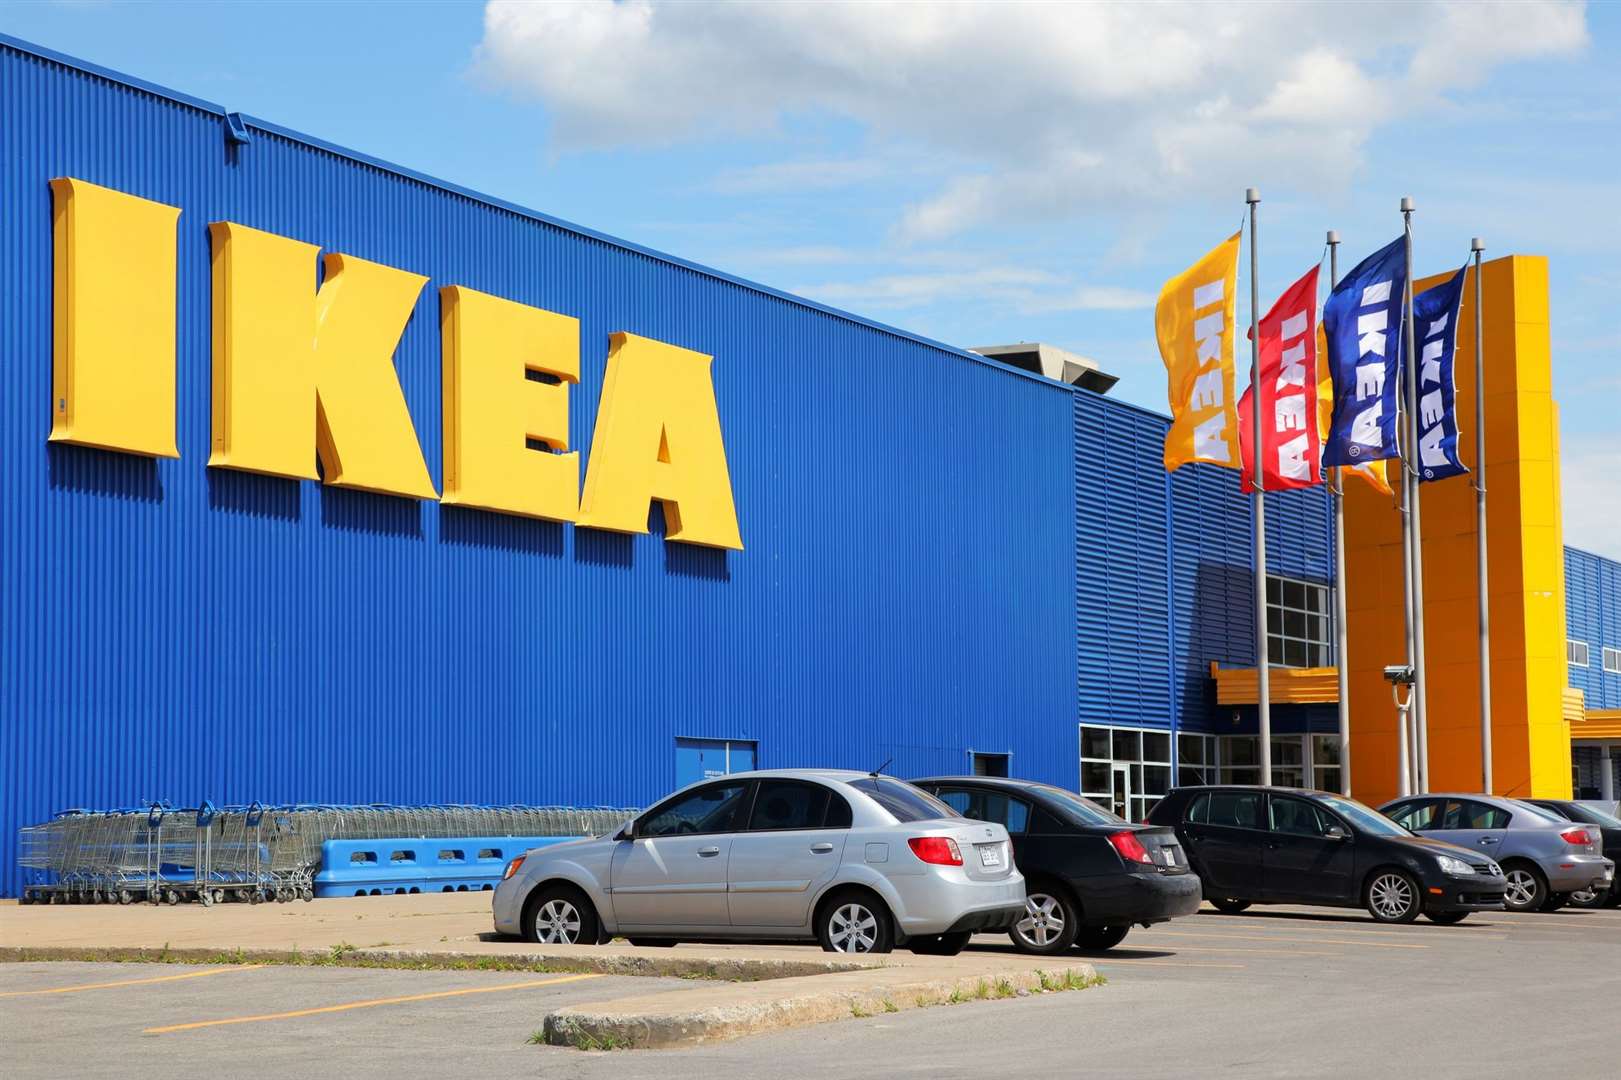 The nearest IKEA to Kent is at Lakeside Retail Park in Essex